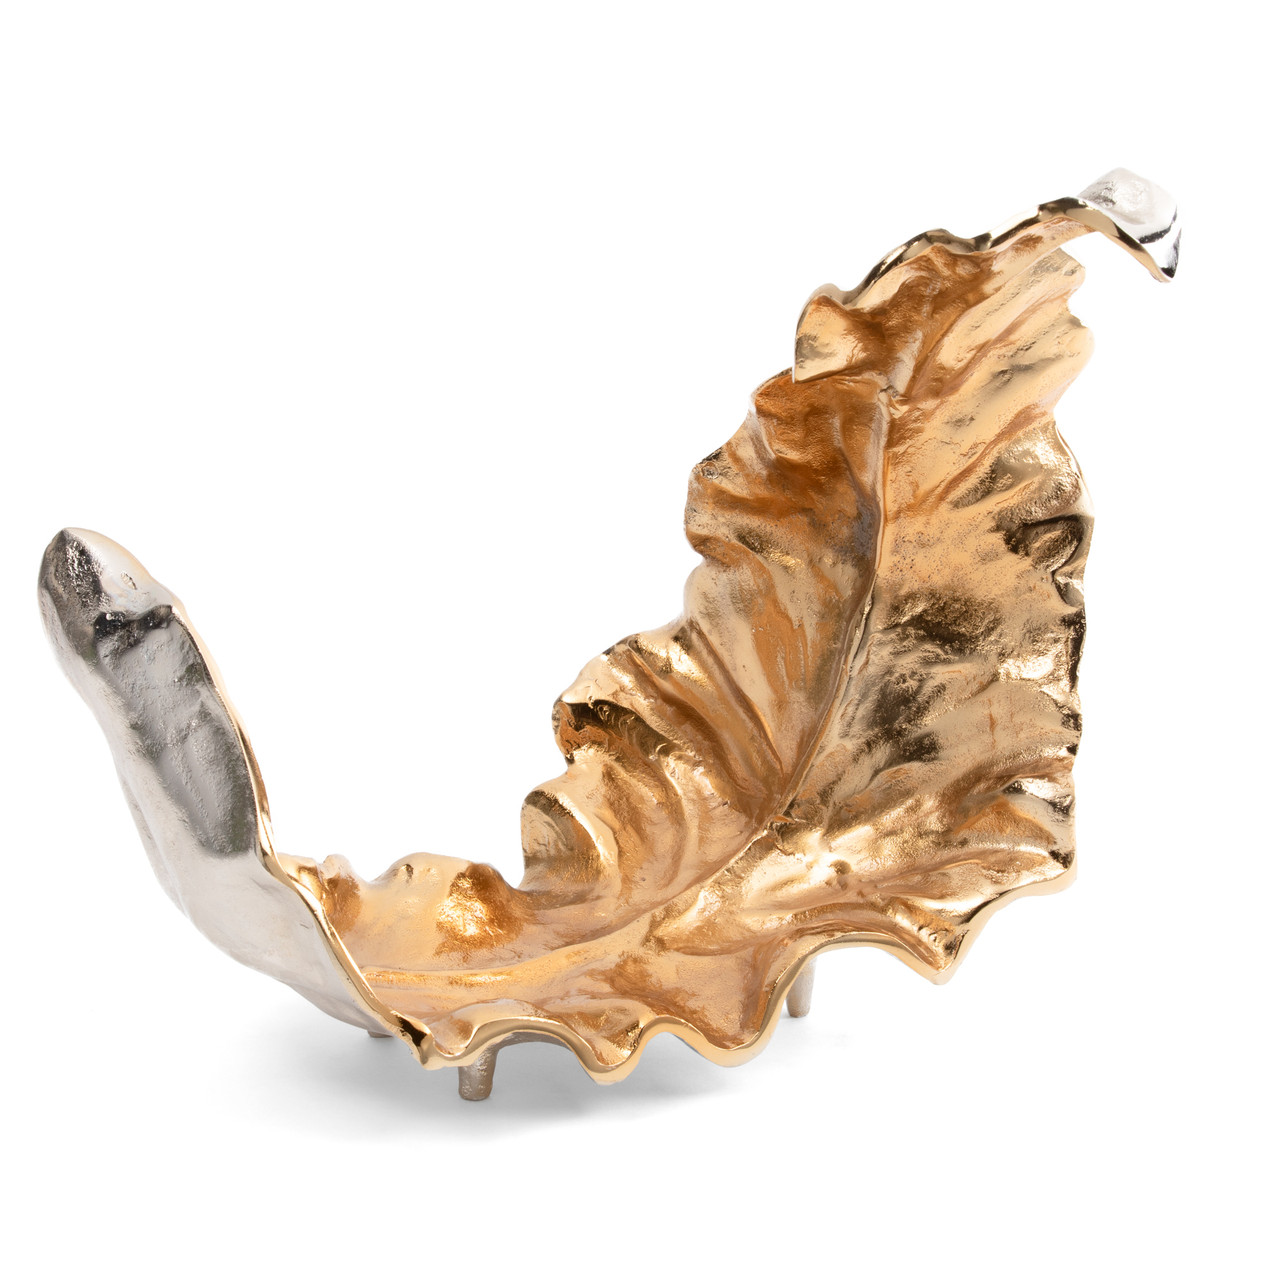 CRESTVIEW COLLECTION CVDZEN002 Willow Med. Two Toned Sculptural Leaf